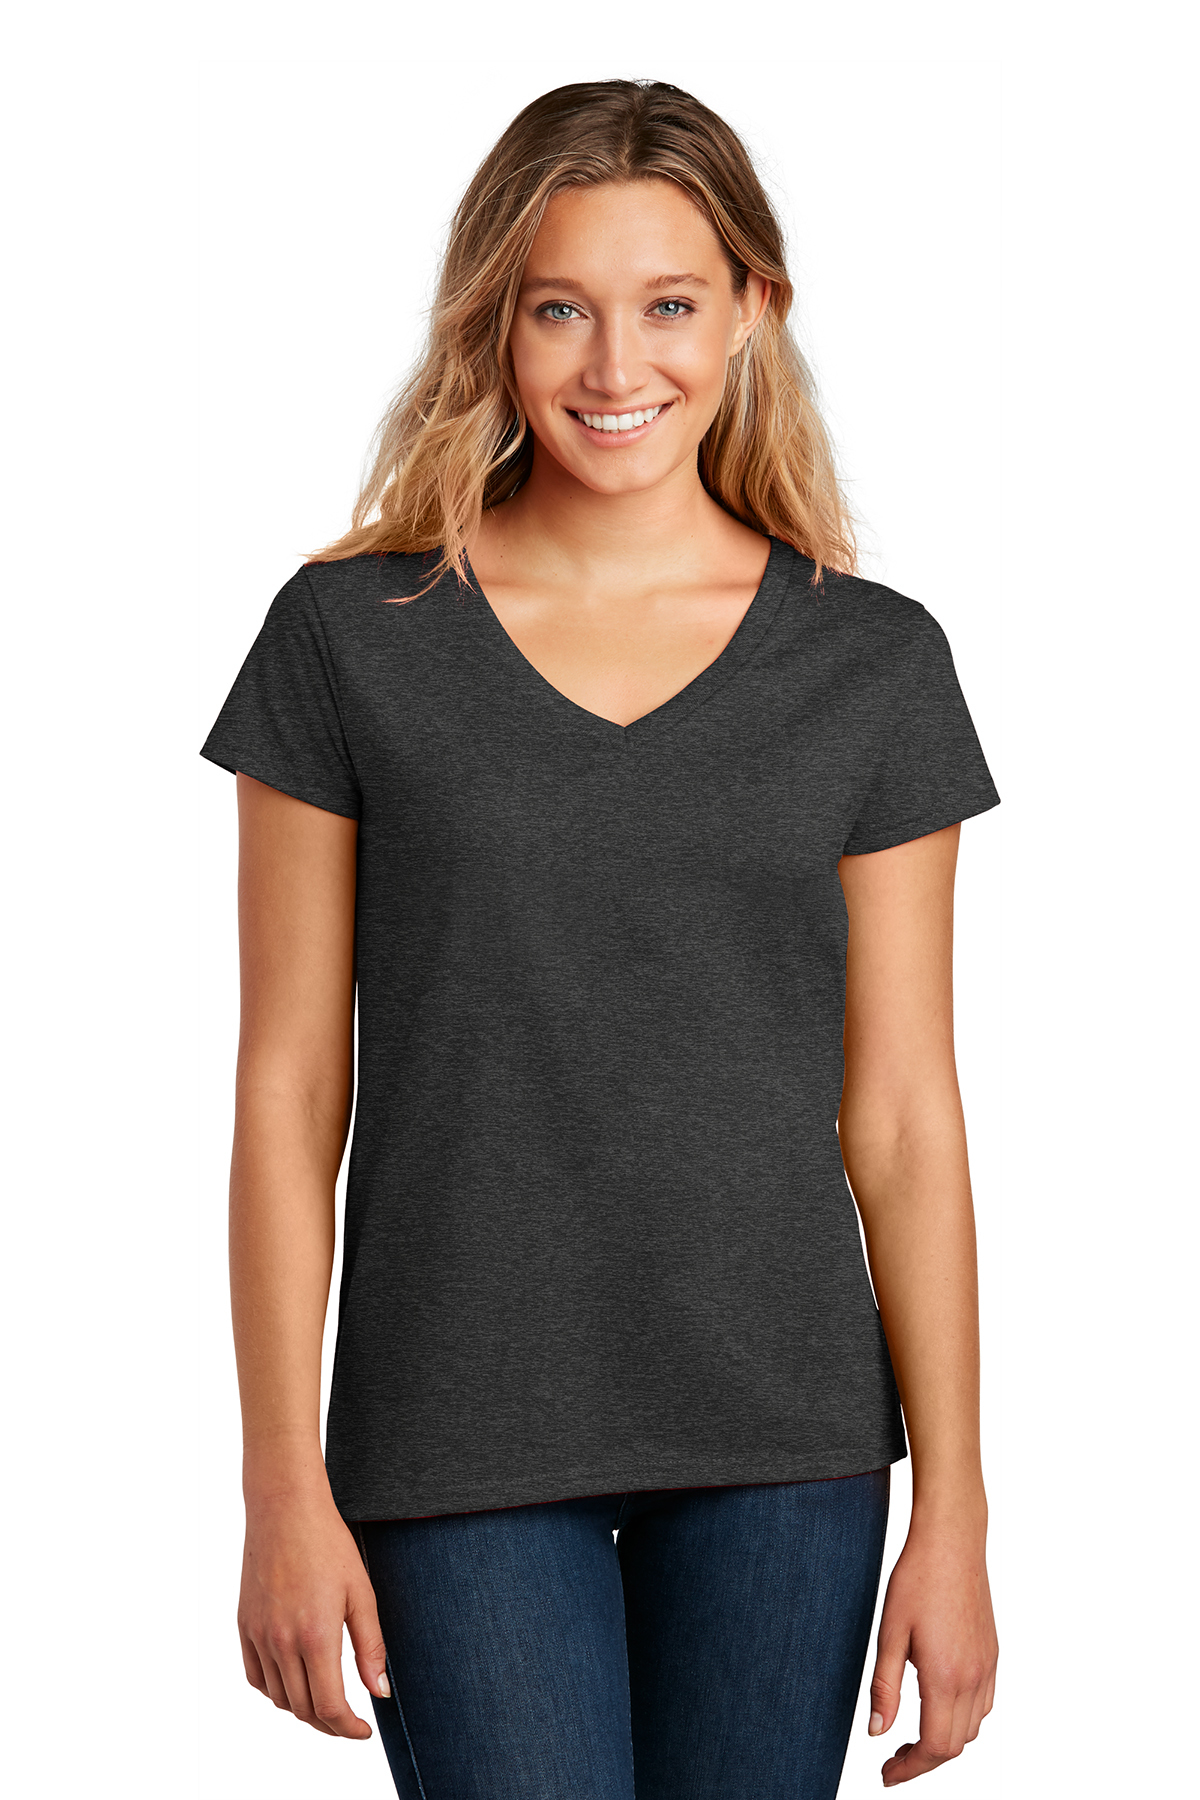 District Women’s Re-Tee V-Neck | Product | District